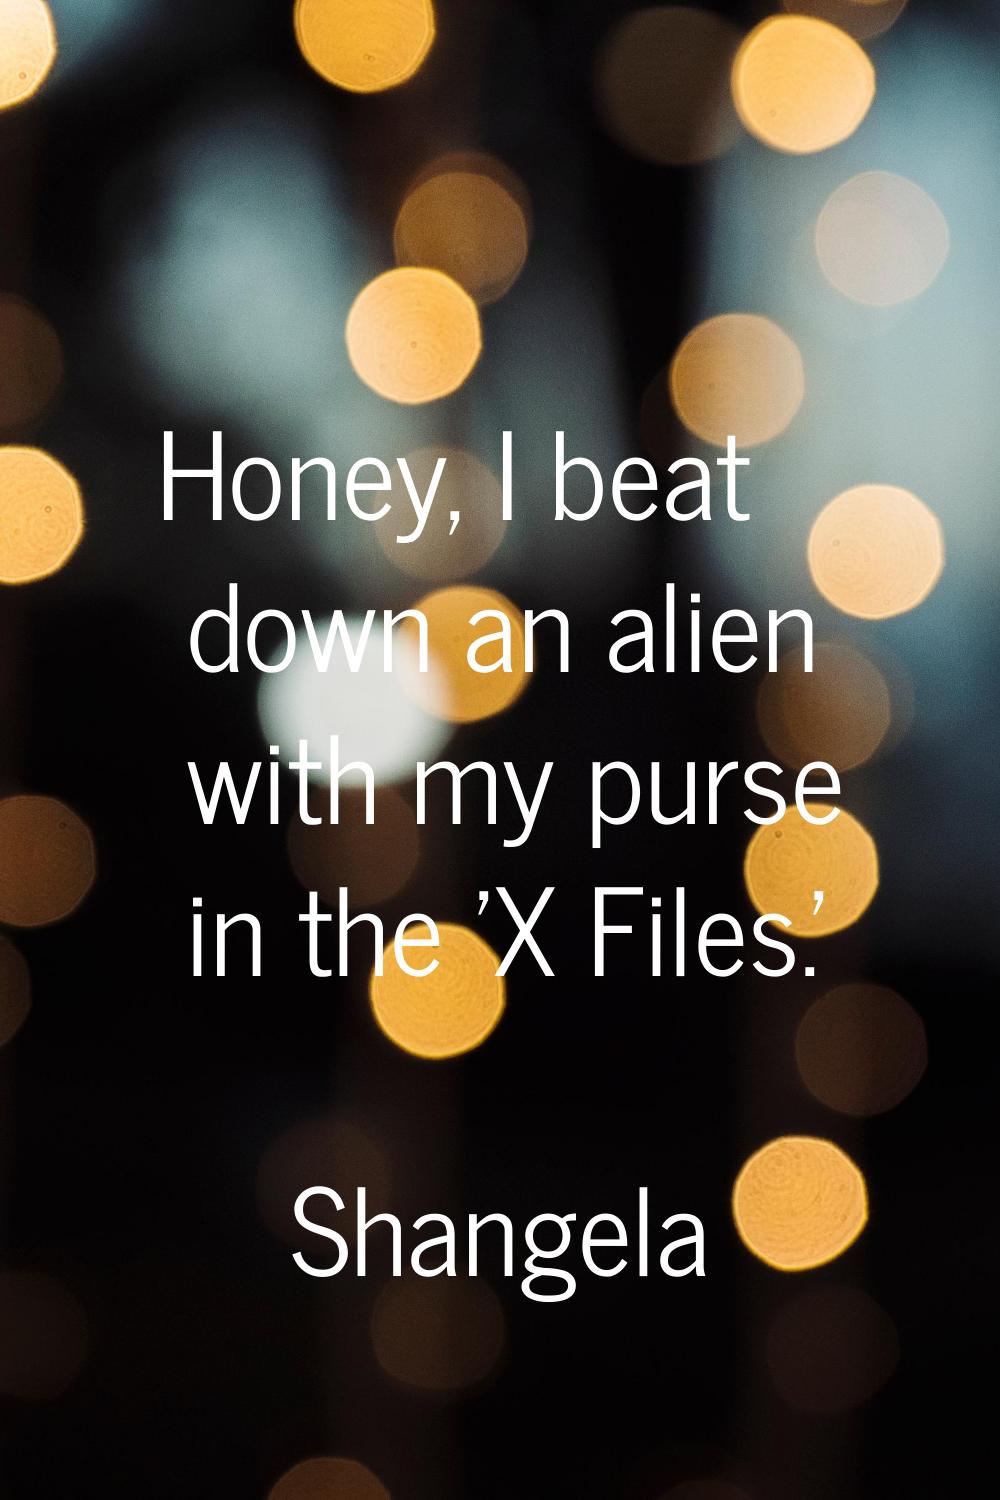 Honey, I beat down an alien with my purse in the 'X Files.'